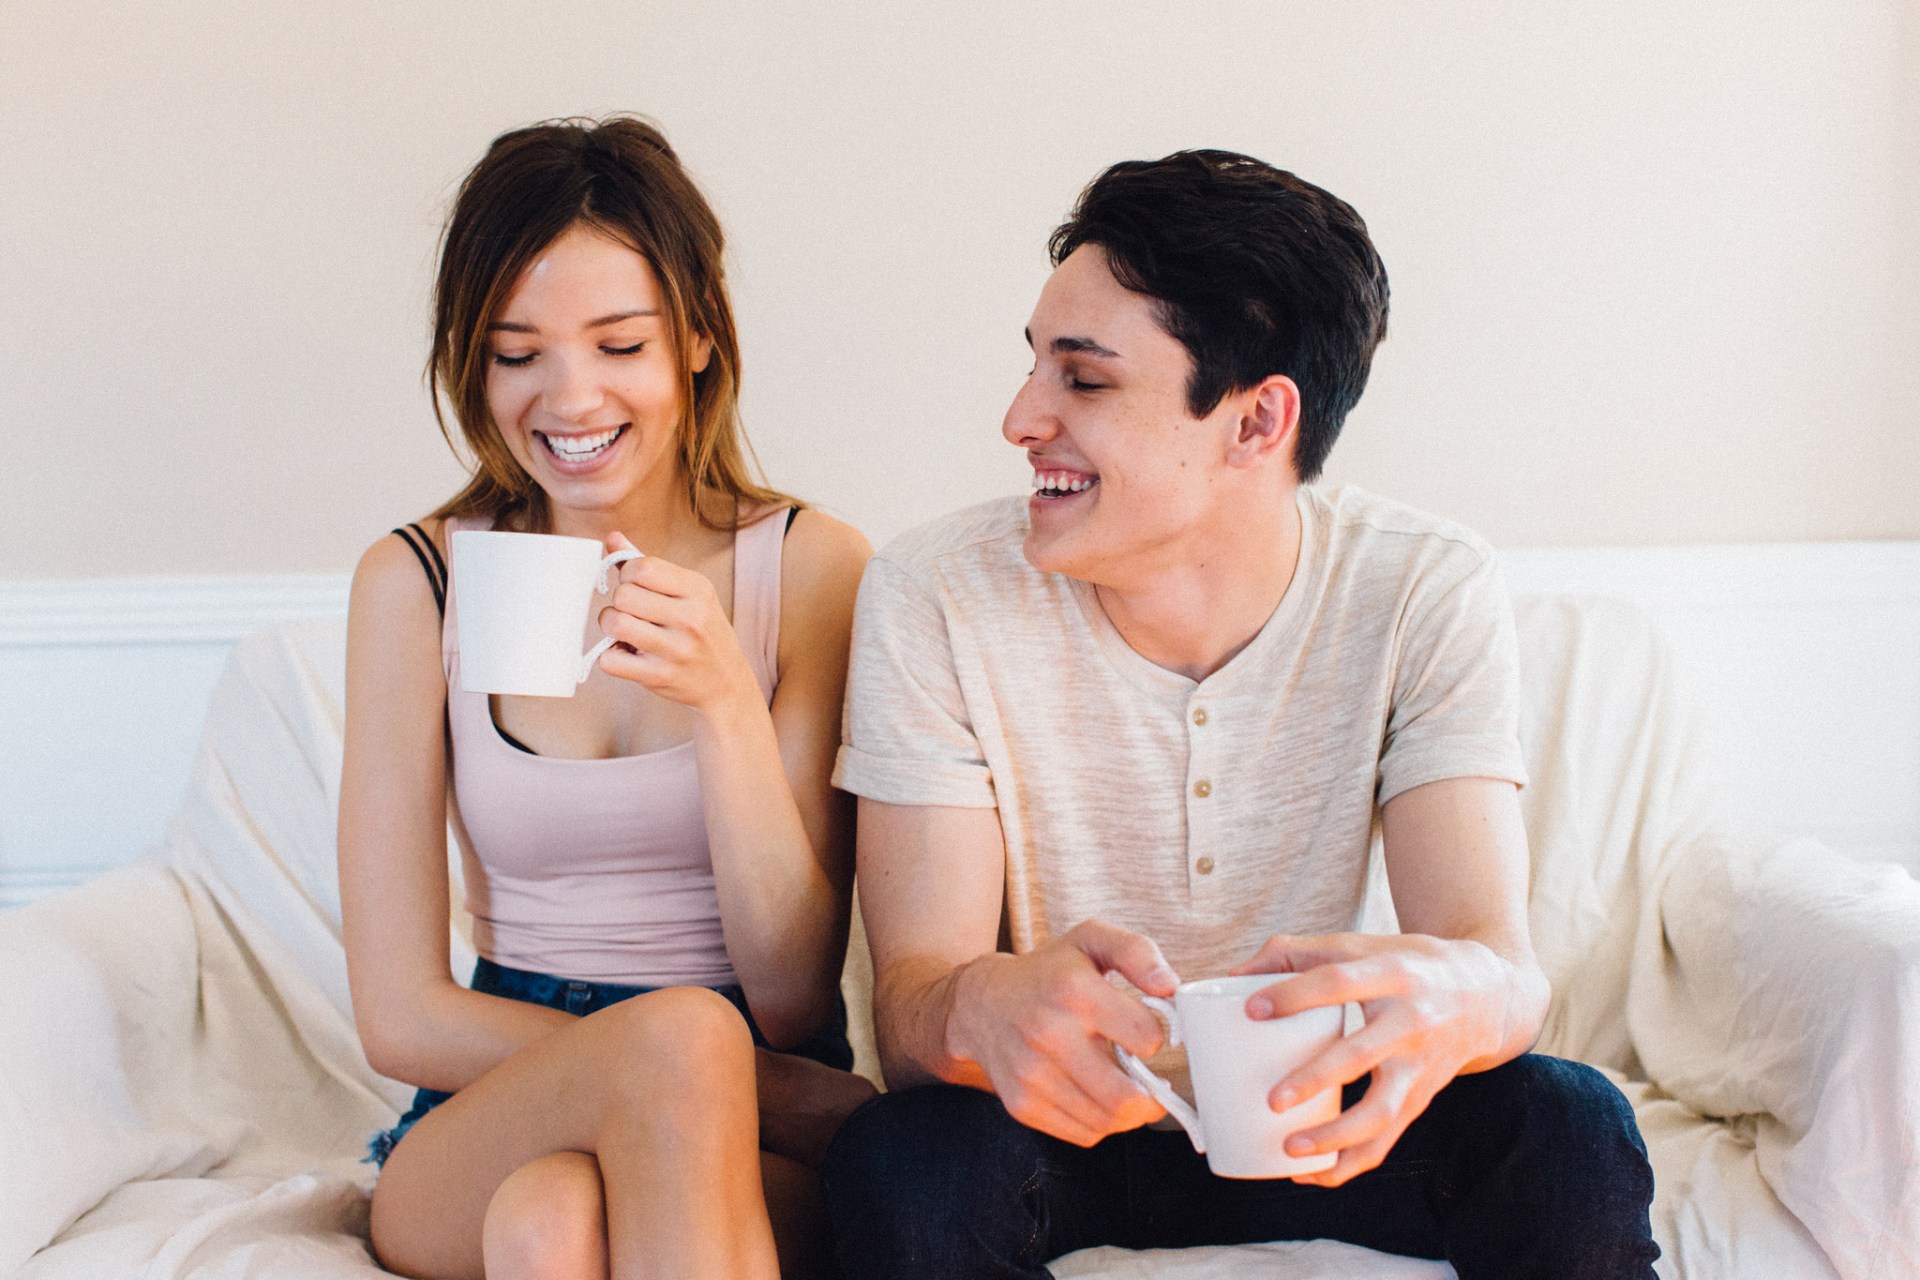 The Imperfection That Makes Your Significant Other Obsessed With You, Based On Your Zodiac Sign